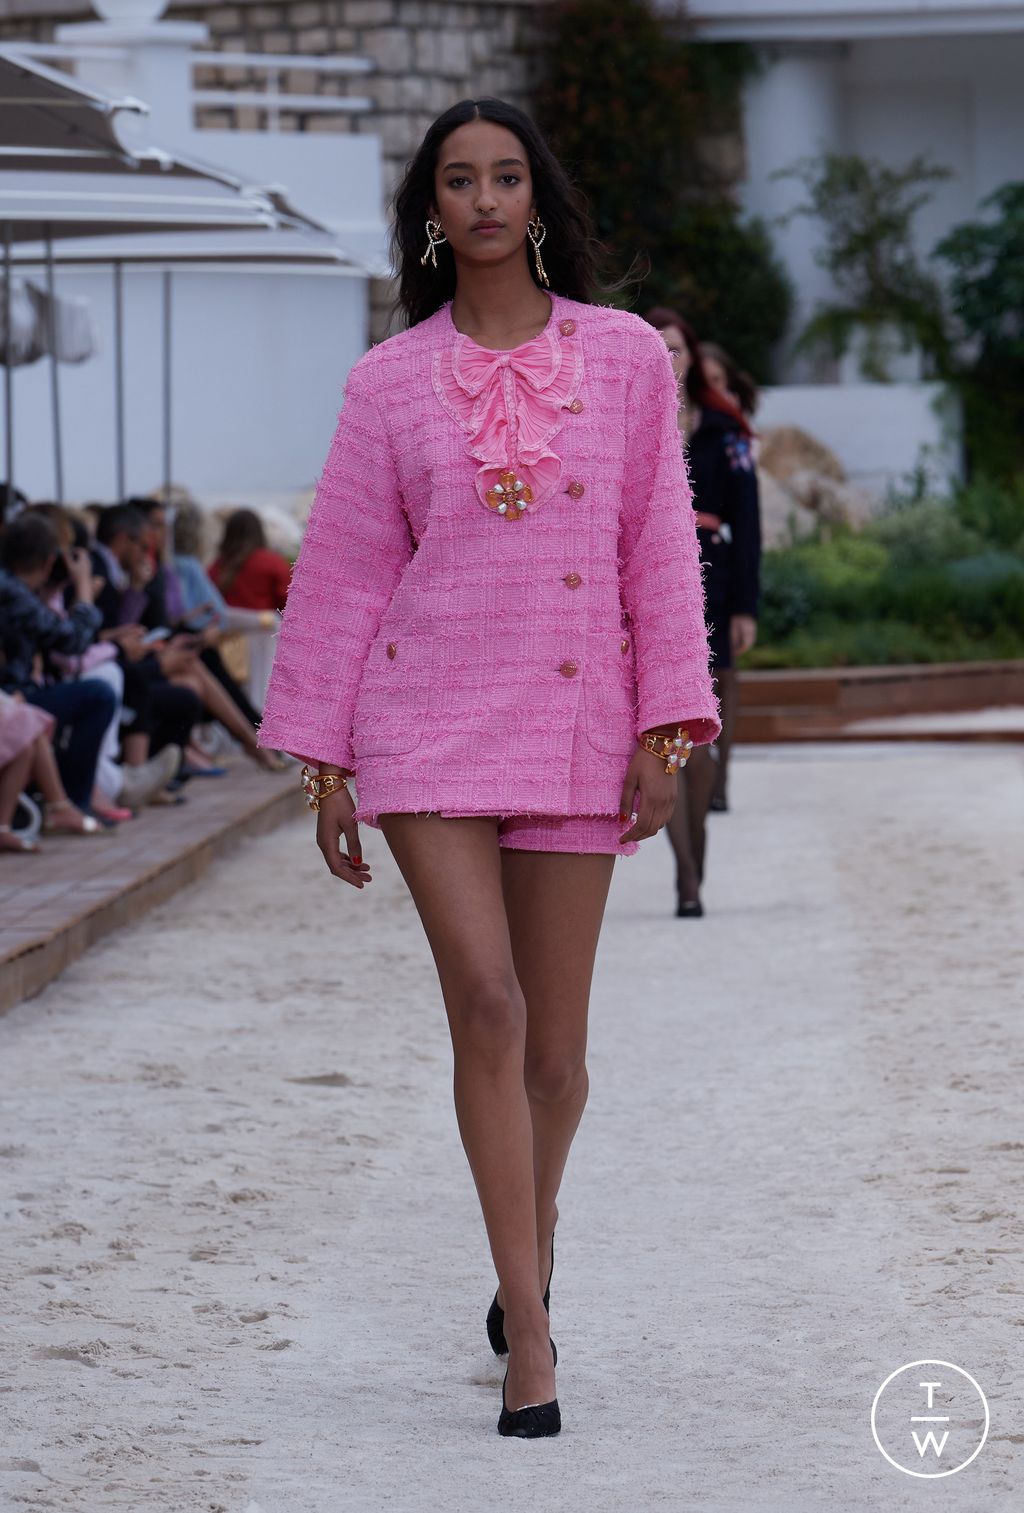 Chanel Resort 2018 collection, runway looks, beauty, models, and reviews.